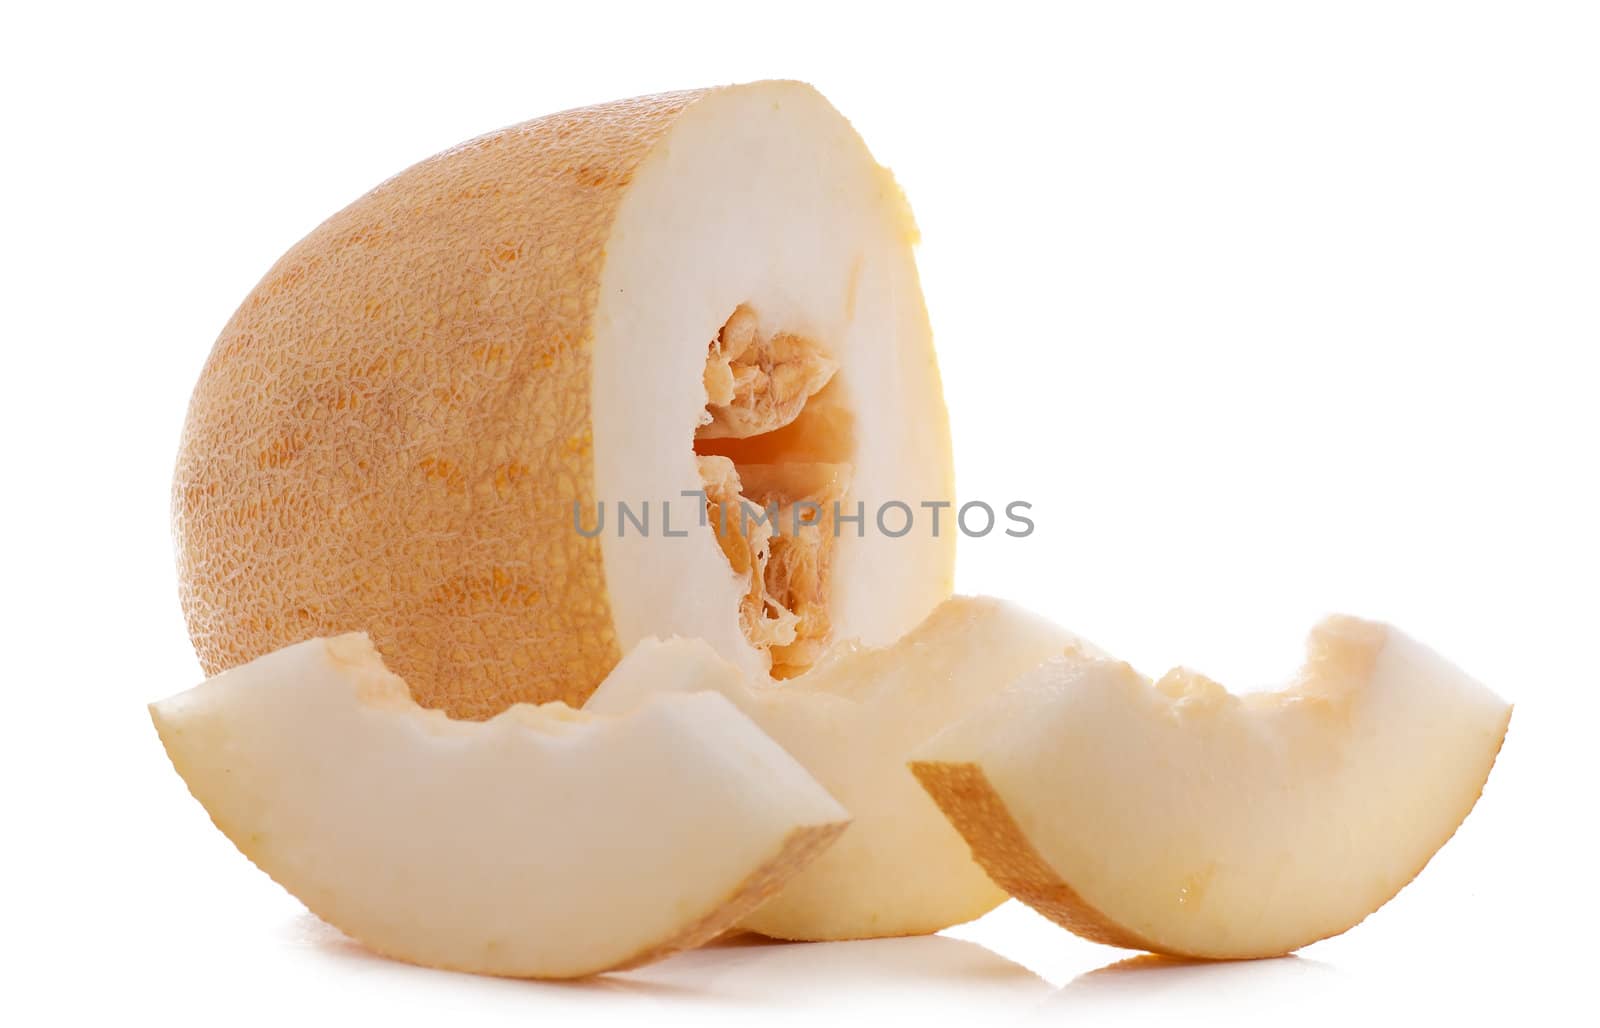 Pieces of juicy melon isolated over white